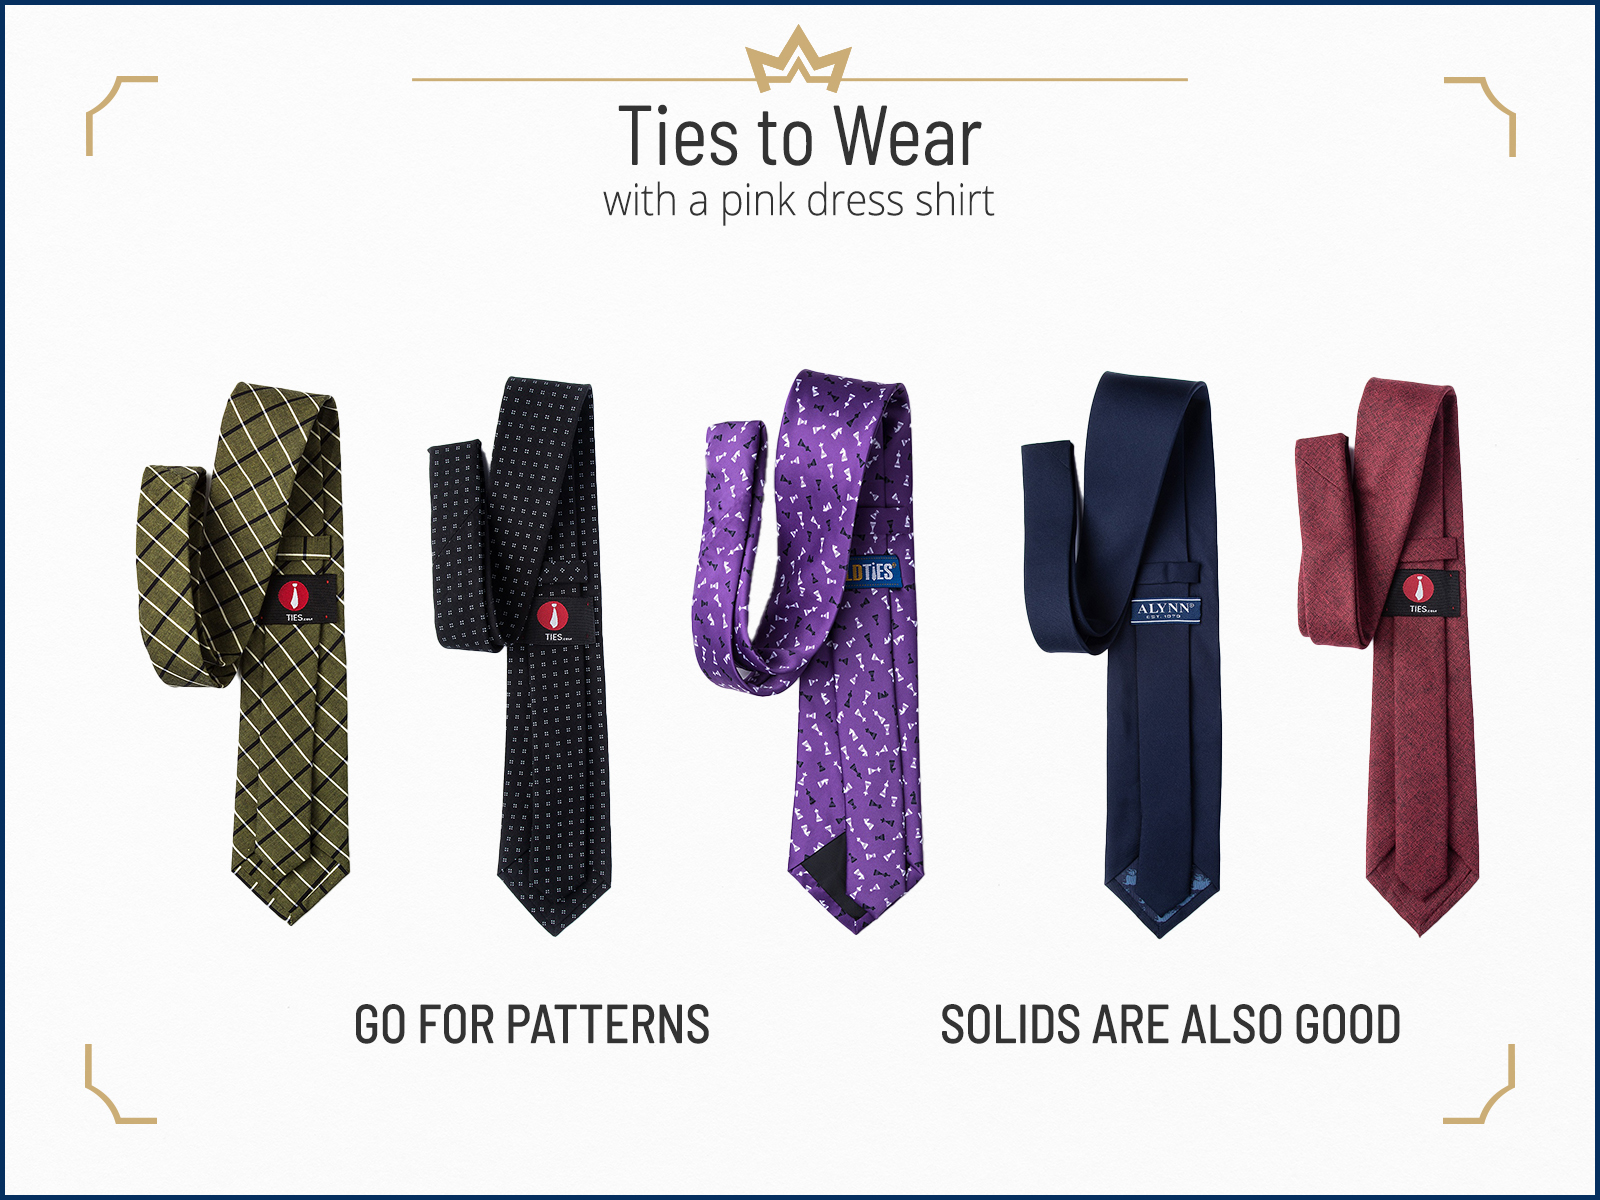 Recommended tie colors and patterns for a pink dress shirt